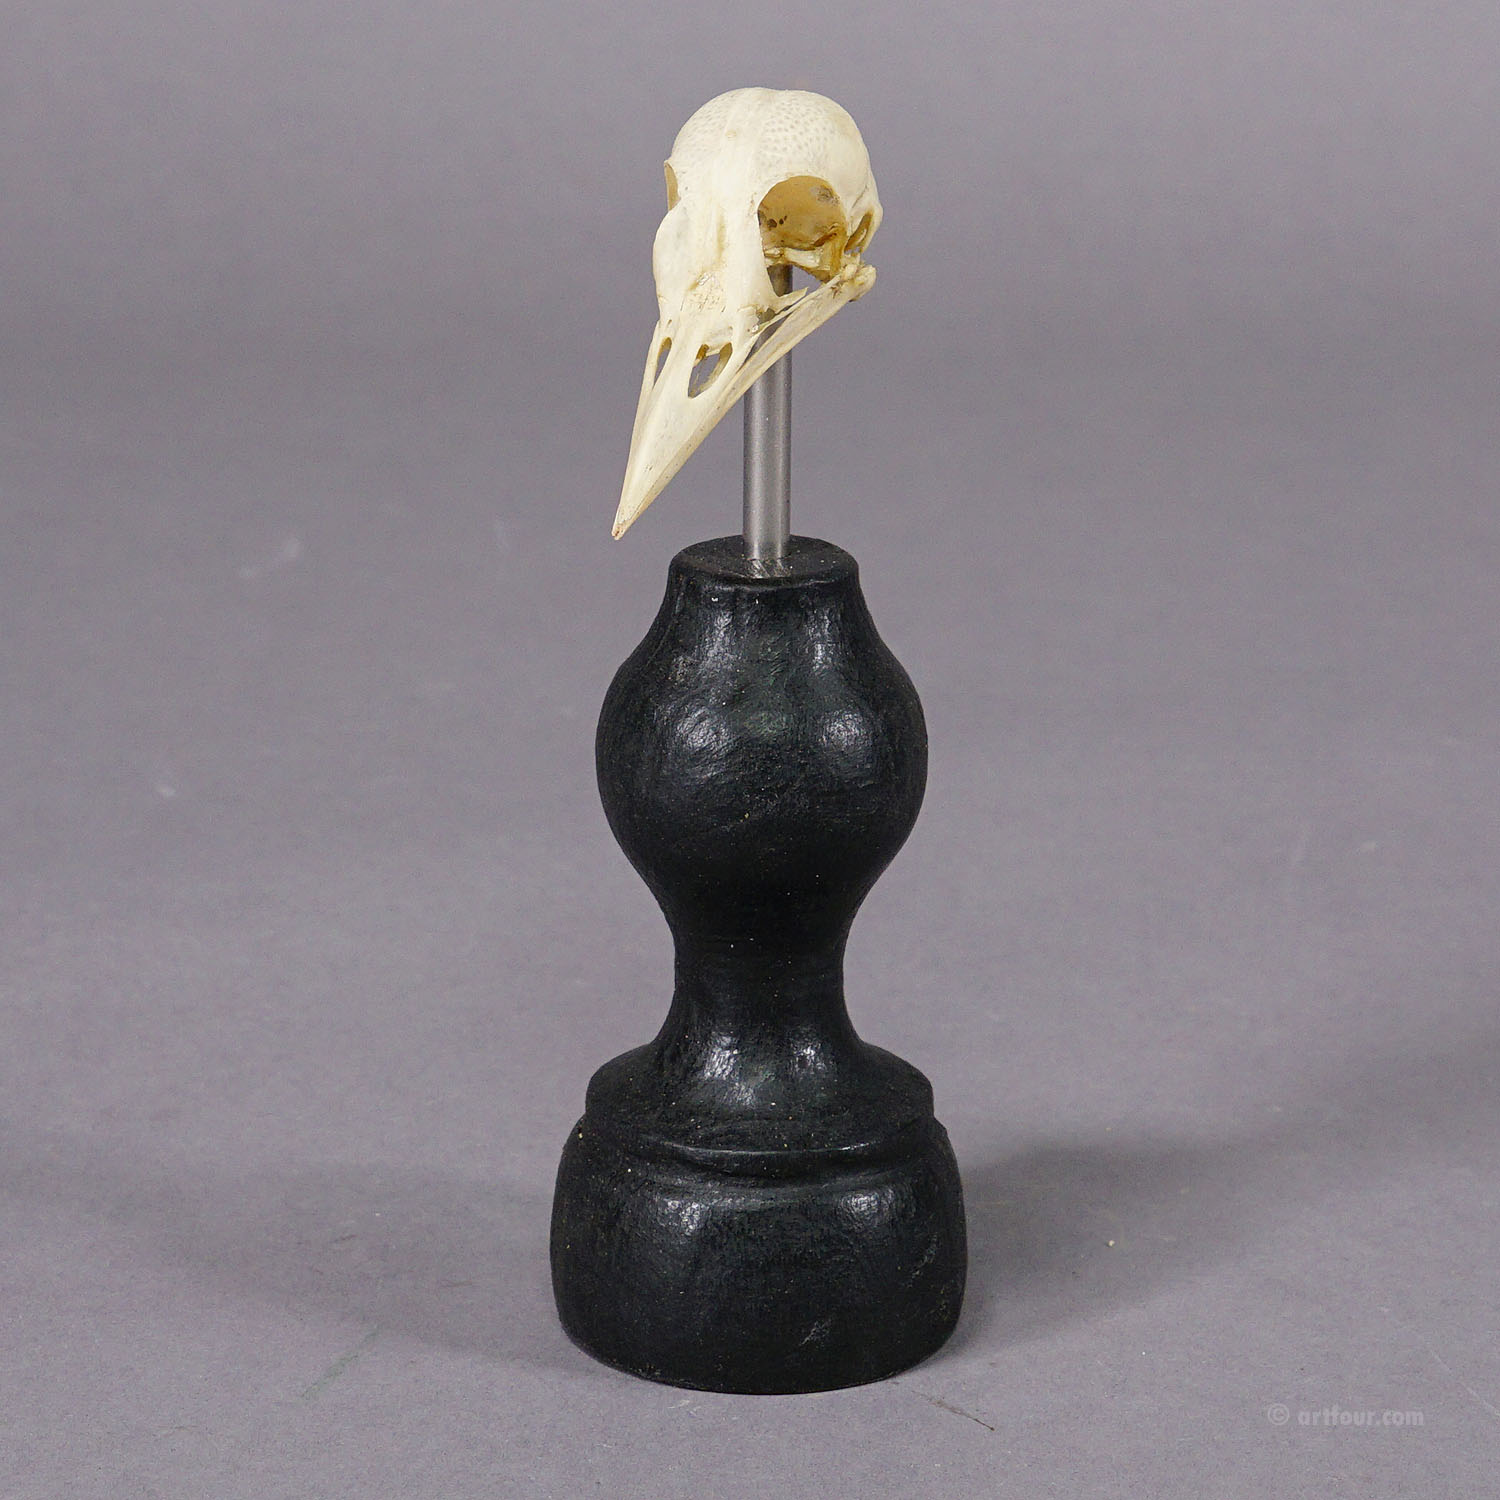 Antique Real Skull of a Raven Bird, Germany ca. 1900s